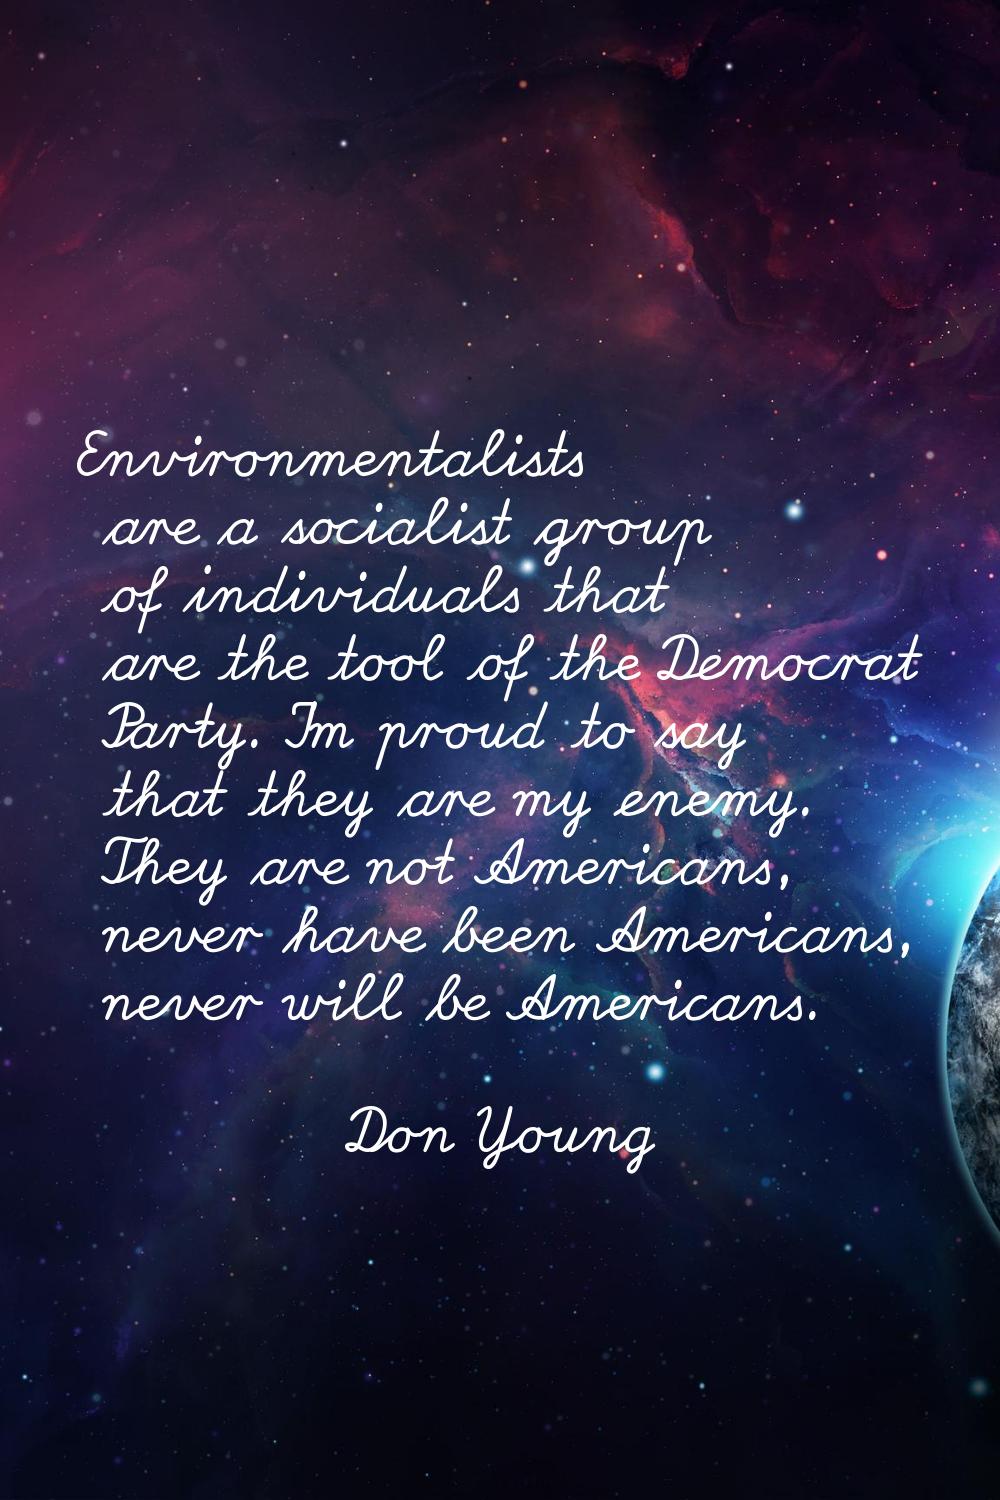 Environmentalists are a socialist group of individuals that are the tool of the Democrat Party. I'm